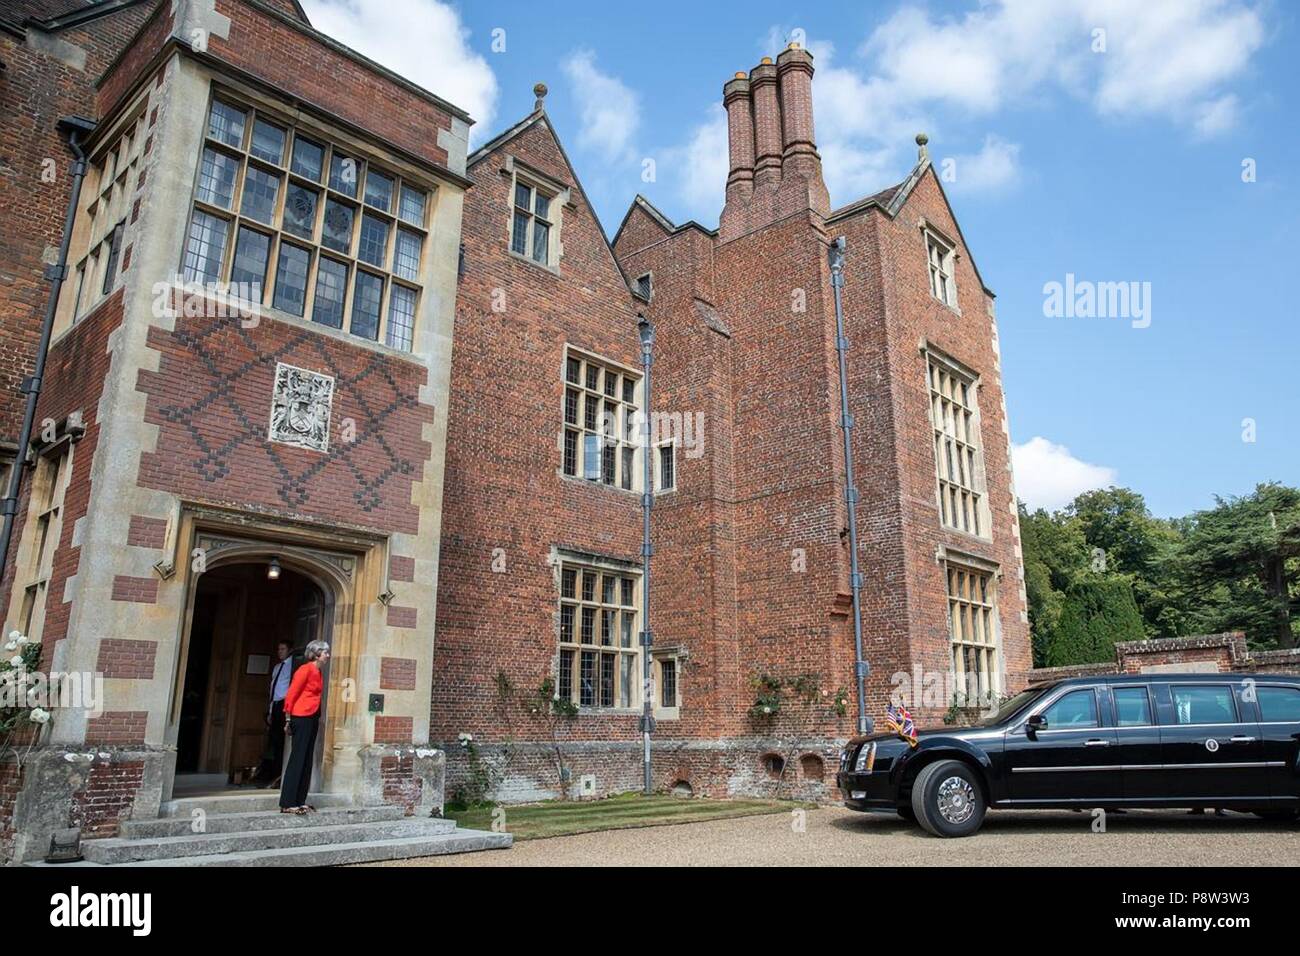 London, UK, 13 July 2018. British Prime Minister Theresa May waits for the limousine carrying U.S President Donald Trump to arrive for bilateral talks at Chequers July 12, 2018 in Buckinghamshire, England. Chequers is the country residence of the Prime Minister. Credit: Planetpix/Alamy Live News Stock Photo